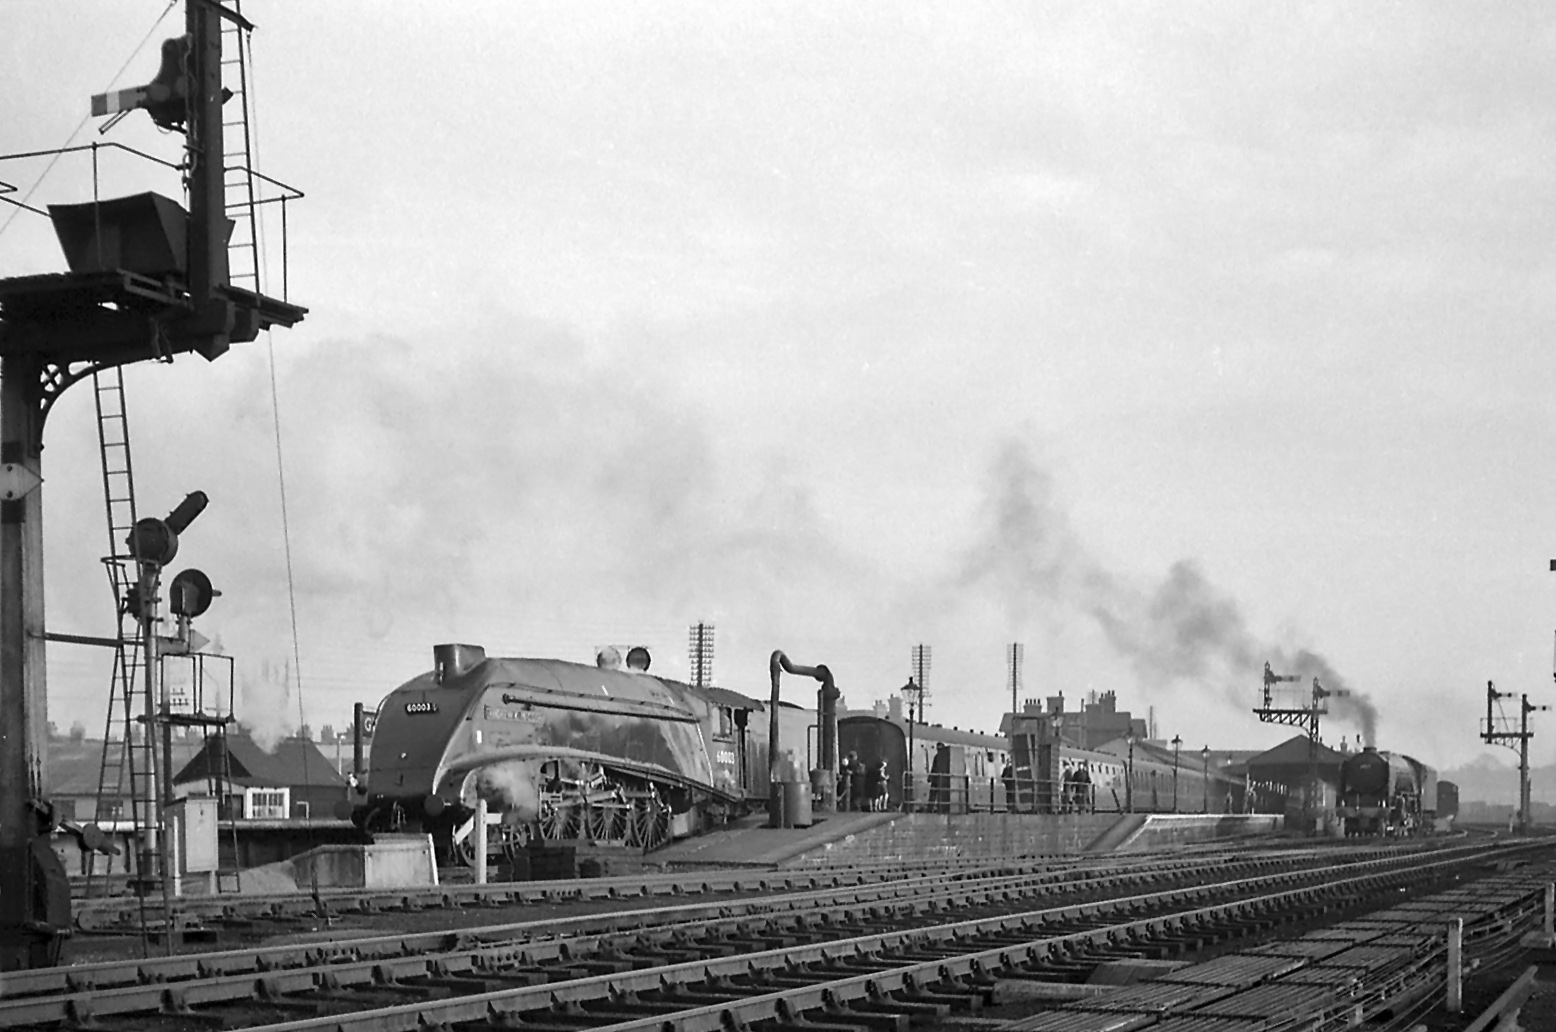 The Tees -Thames Express has arrived in platform 3. Class A4 No.60003 Andrew K McCosh has already been uncoupled from the train by one of Grantham's passenger shunters. It is drawing forward, will pass the signal box and move across to the Nottingham line before reversing back to the shed, when it will pass close to where Noel is standing. No. 60517 is still waiting in the right background, its fireman making final preparations by building up the fire. Photograph by Noel Ingram, used with permission from Steam World.